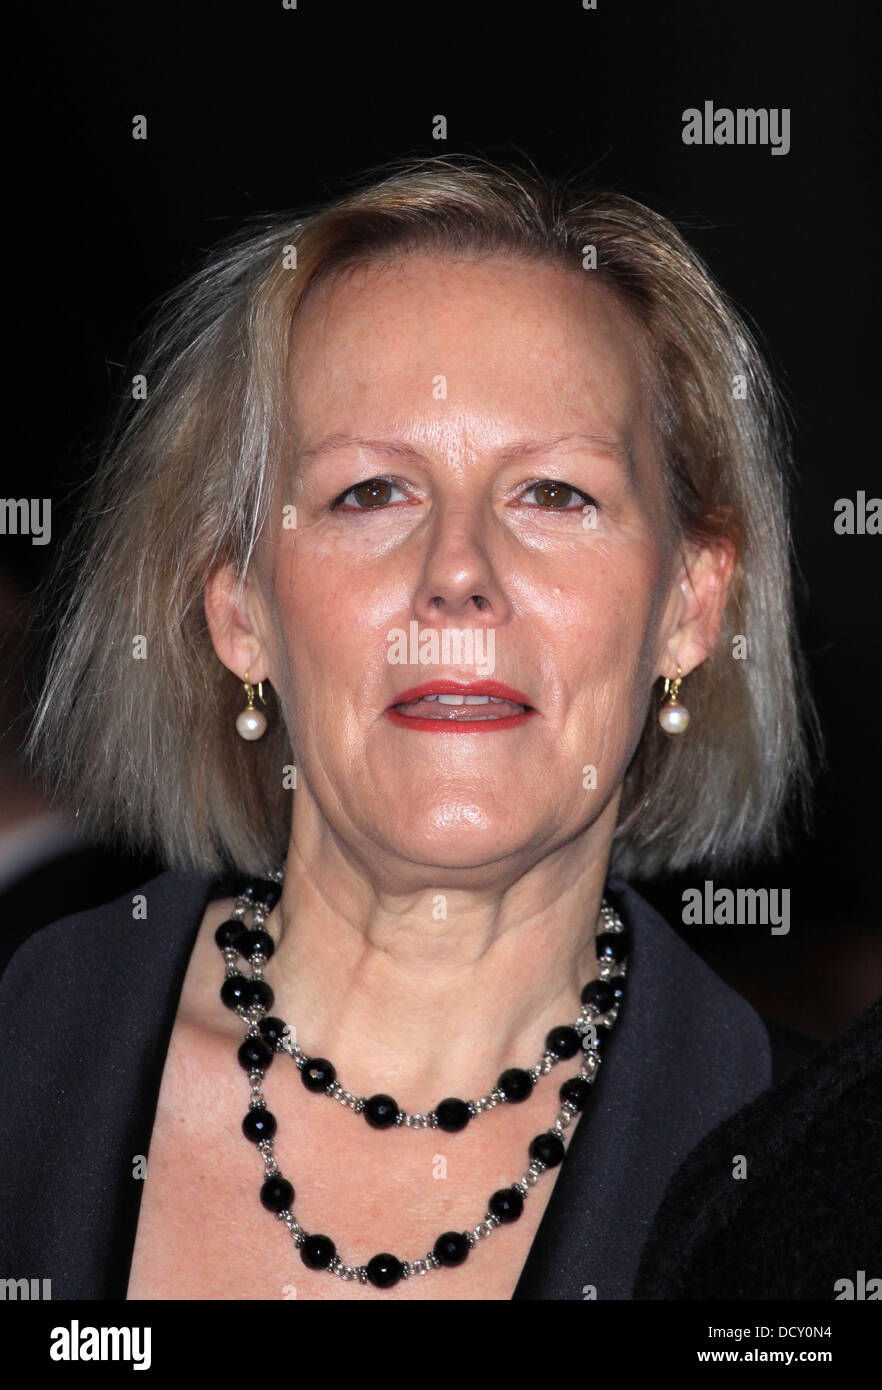 Phyllida Lloyd 'The Iron Lady' UK film premiere held at the BFI Southbank - Arrivals London, England - 04.01.12 Stock Photo